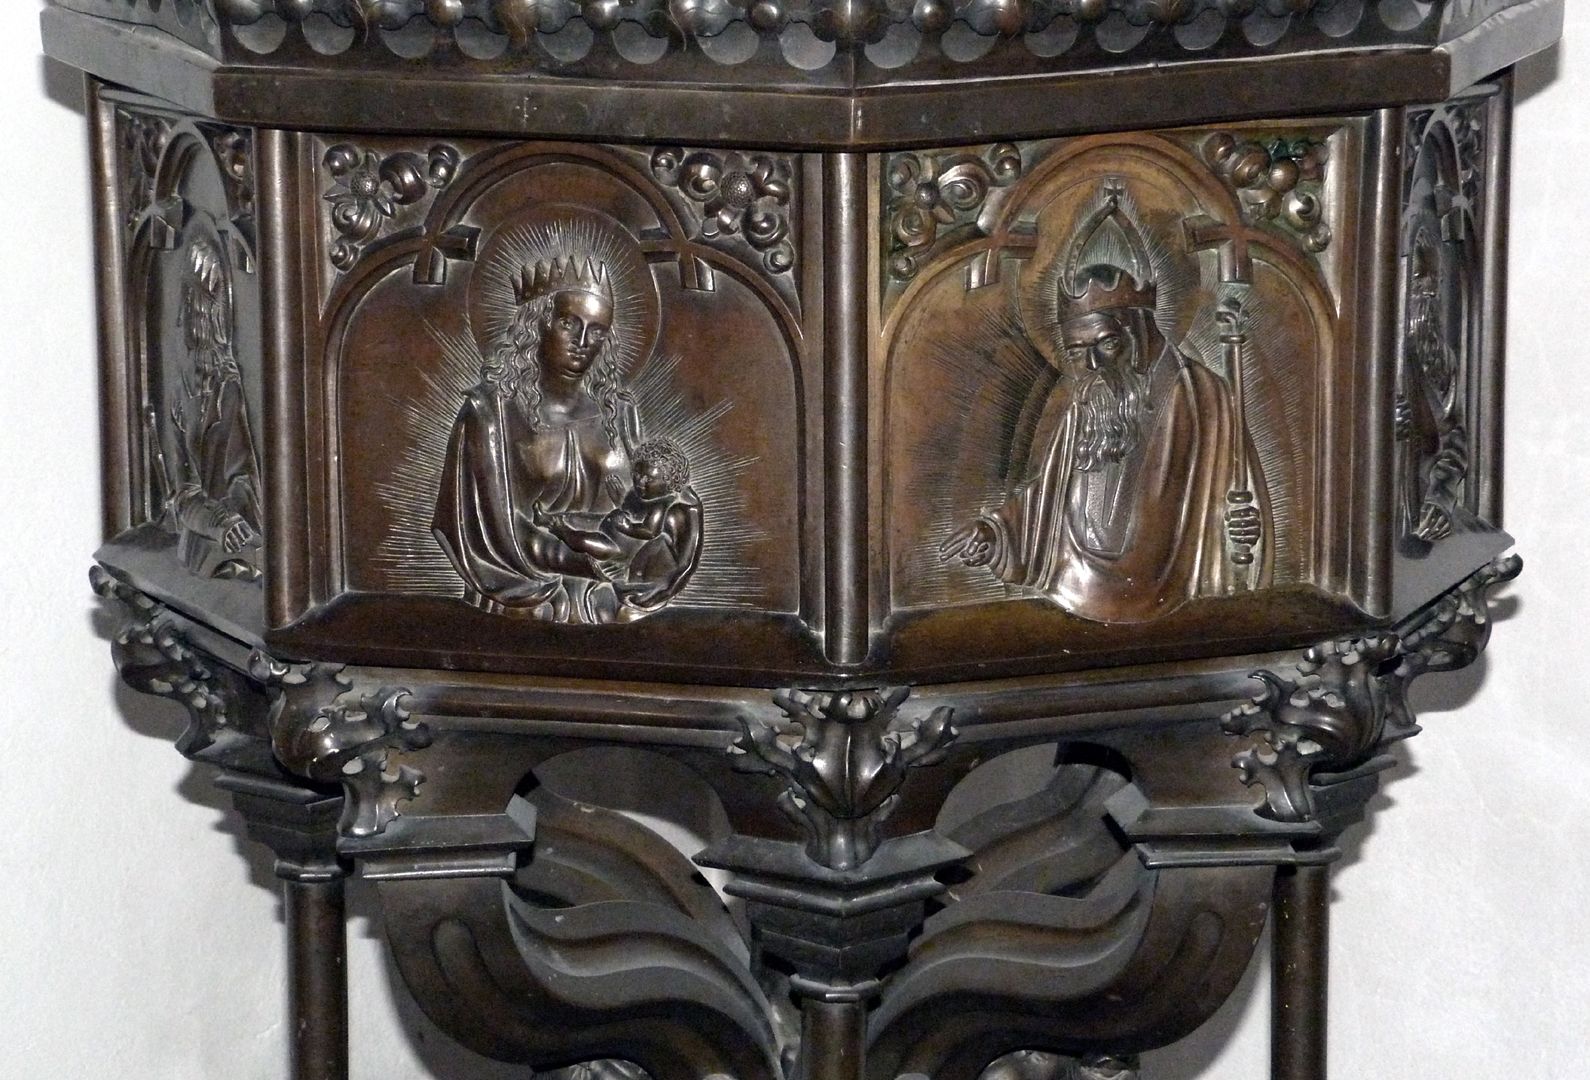 Baptismal font (Ochsenfurt) View from northwest. Baptismal font with depictions of the Mother of God with the Child Jesus and God the Father.